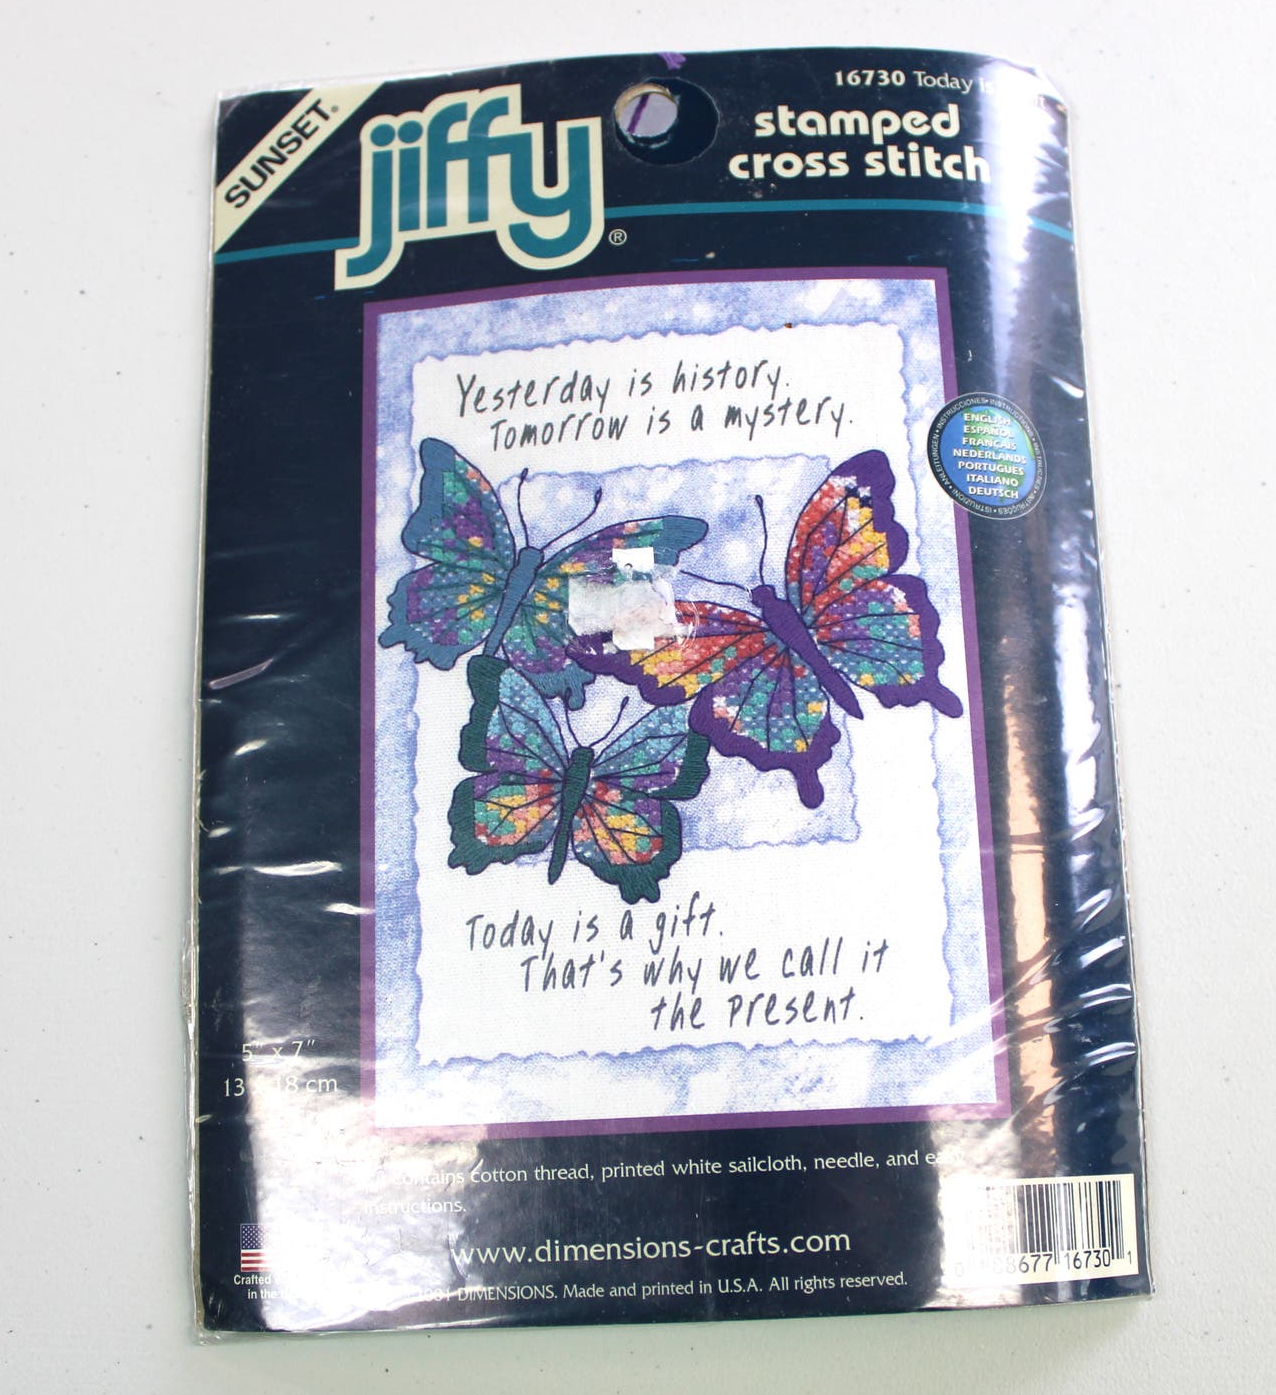 NEW Jiffy Stamped Cross Stitch Today Is A Gift Butterflies Multi Color #16730  - $14.49